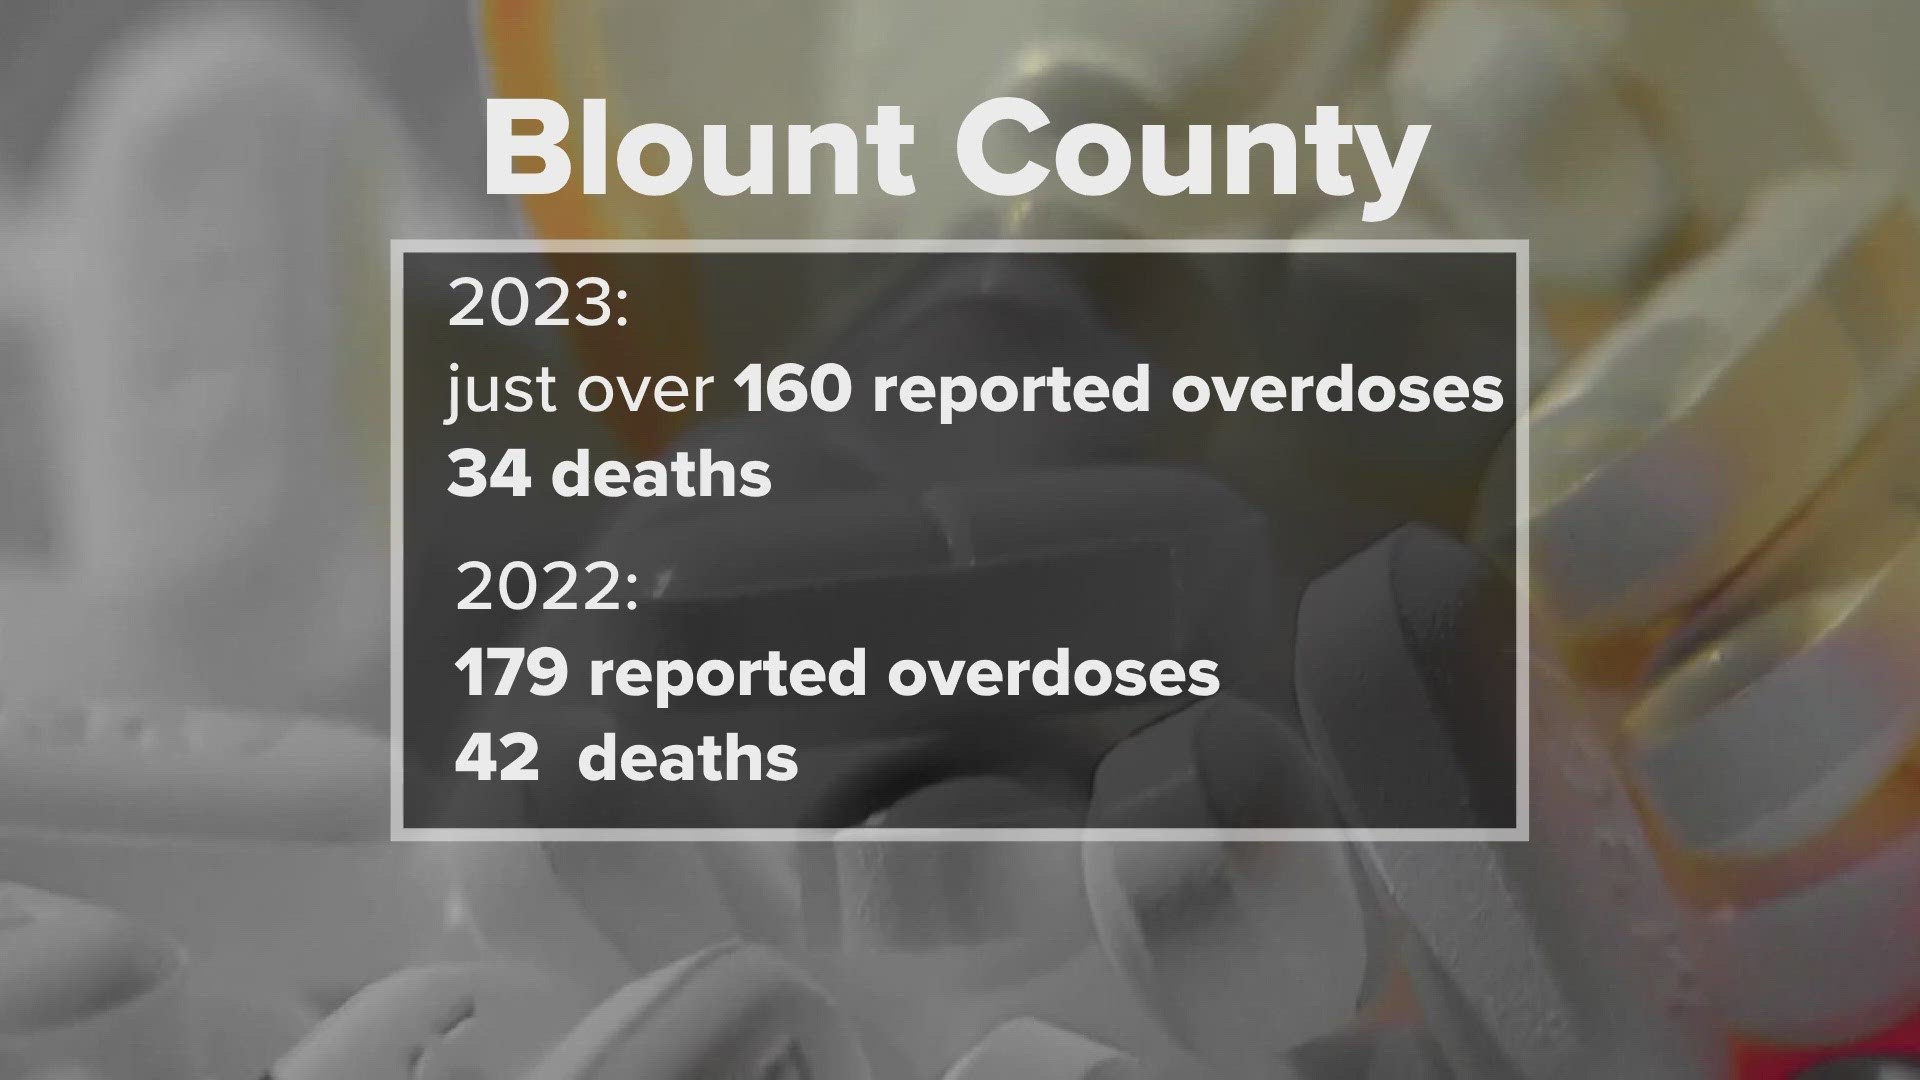 The Blount County Sheriff's Office said as of August 2023, 34 people died due to a drug overdose this year.